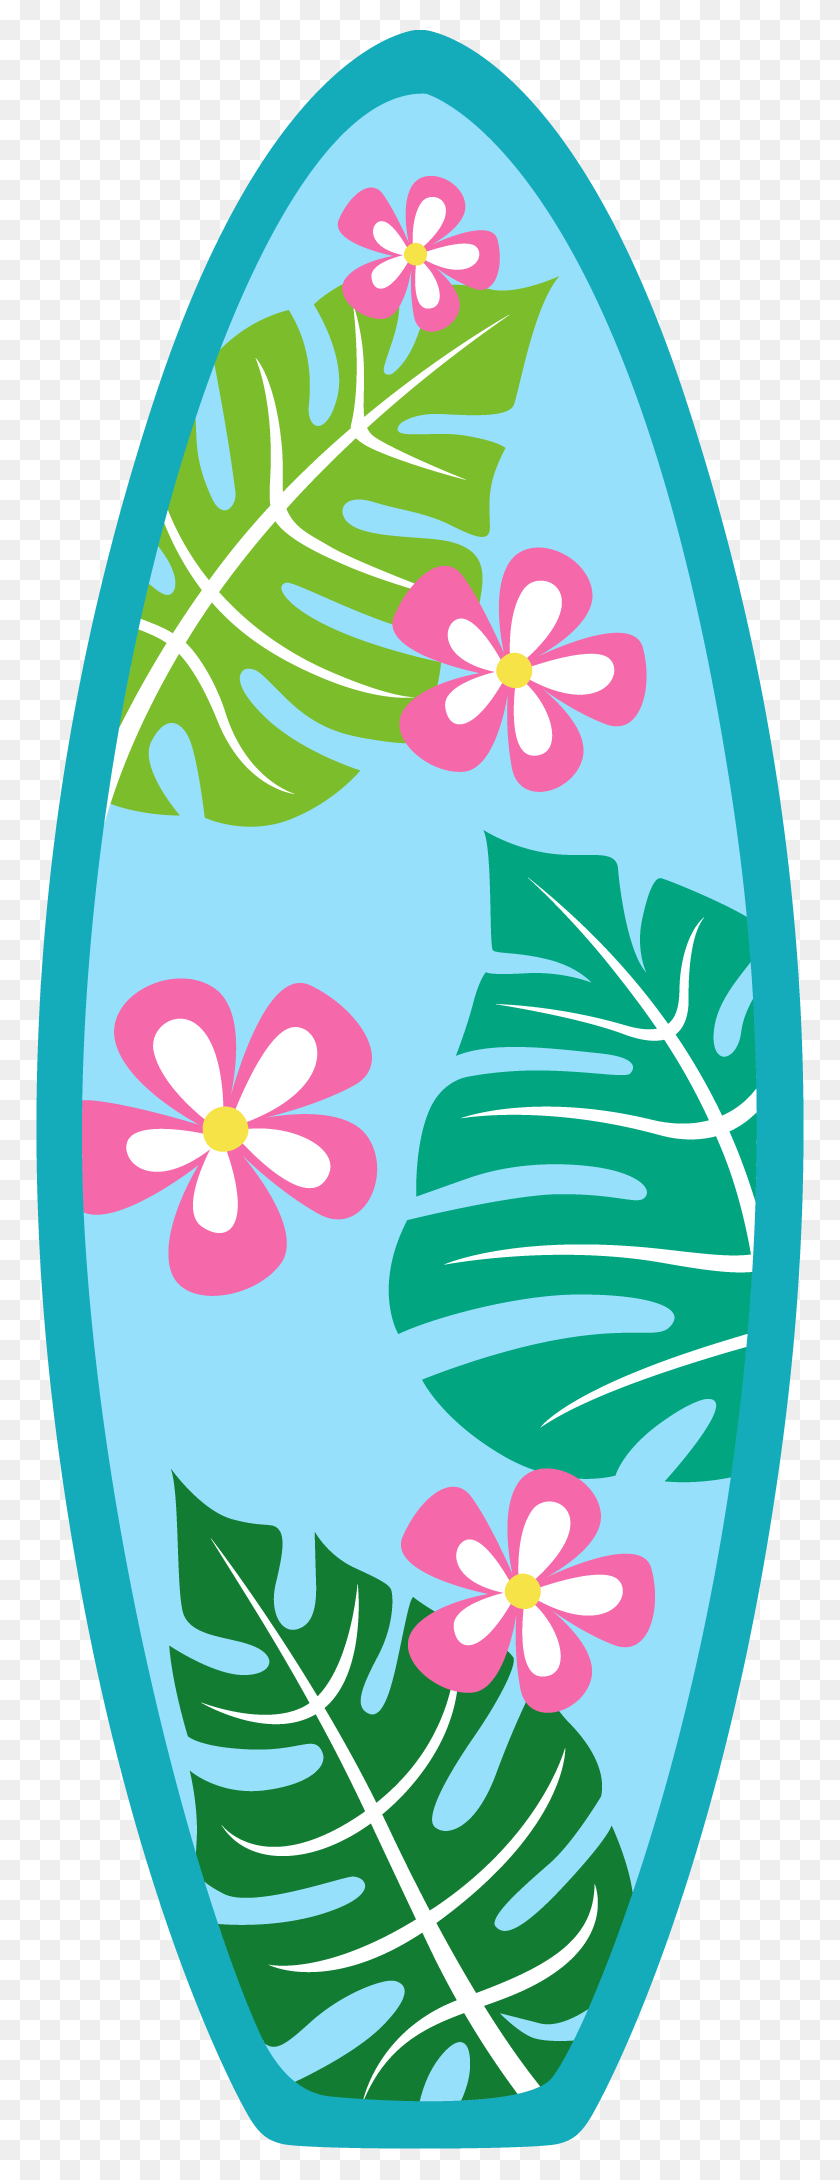 Surfboard Clipart Regarding Surfboard Clipart Moana Black And White Clipart Stunning Free Transparent Png Clipart Images Free Download